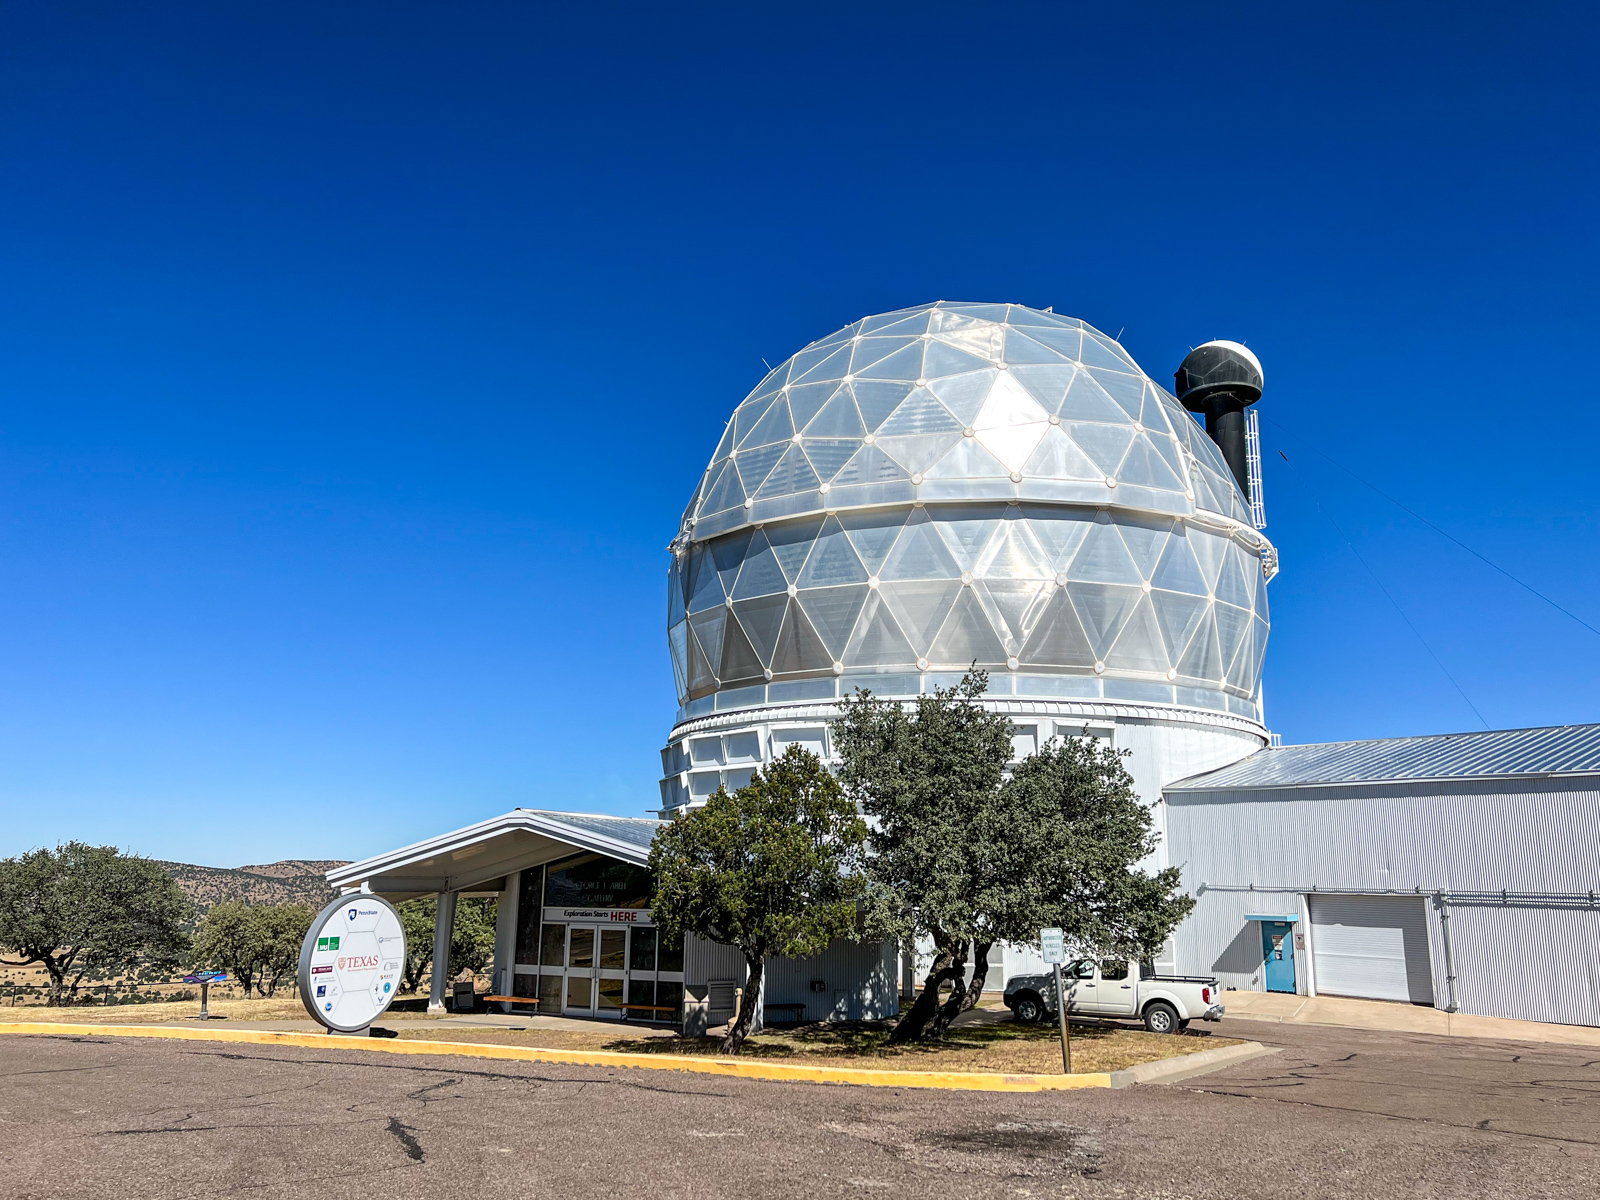 Entrance to the Hobby-Eberly Telescope at the McDonald Observatory in Texas